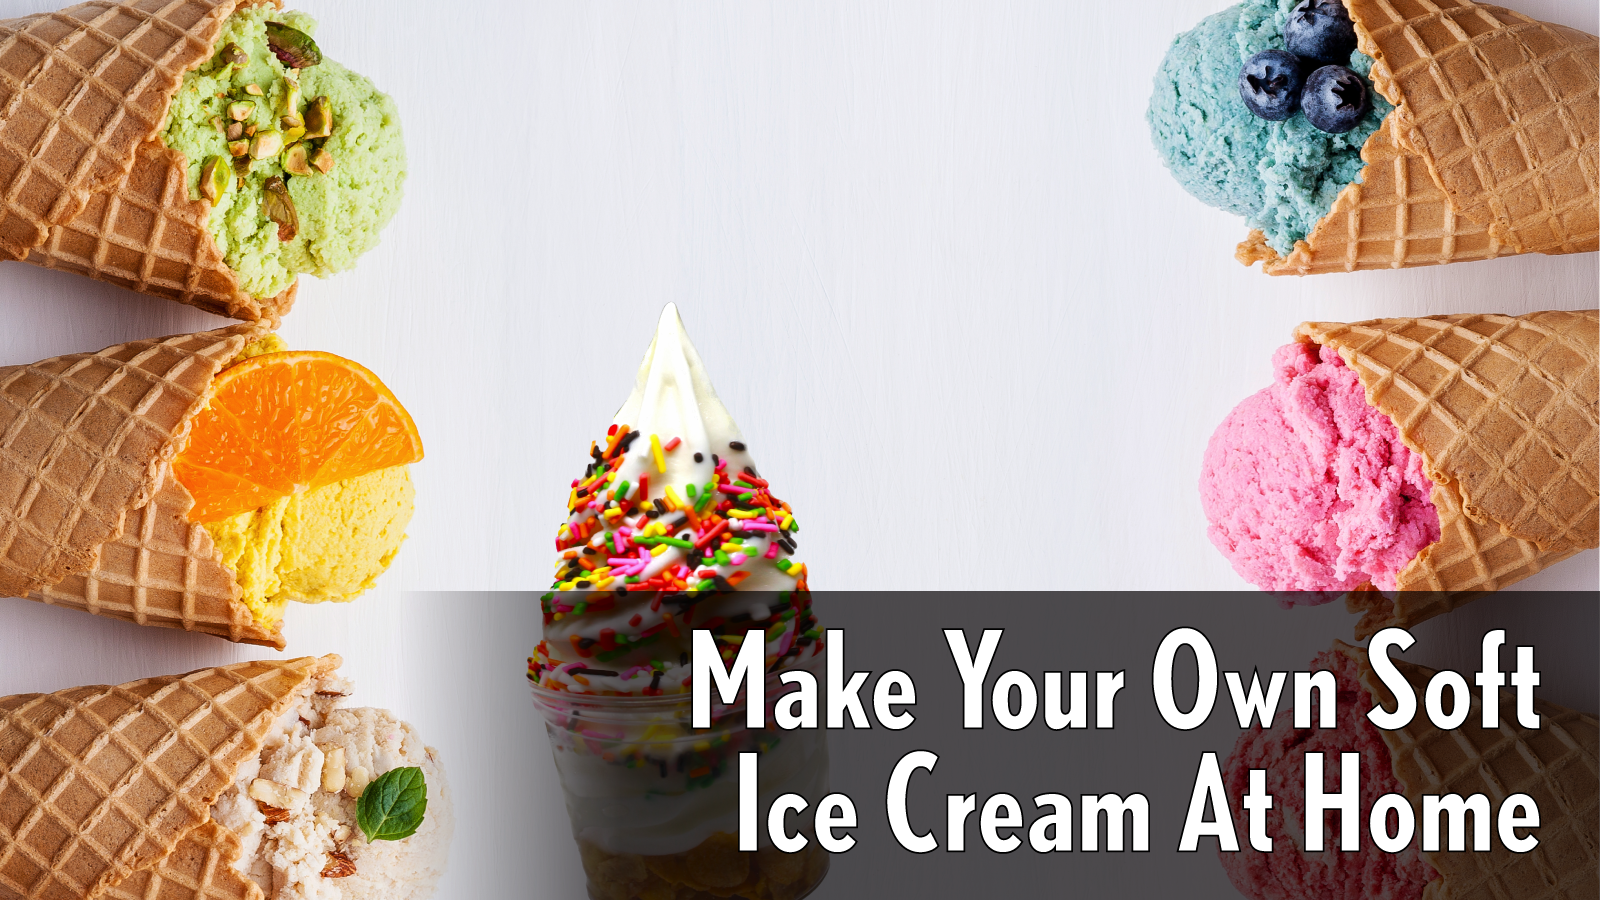 Make Your Own Soft Ice Cream at Home